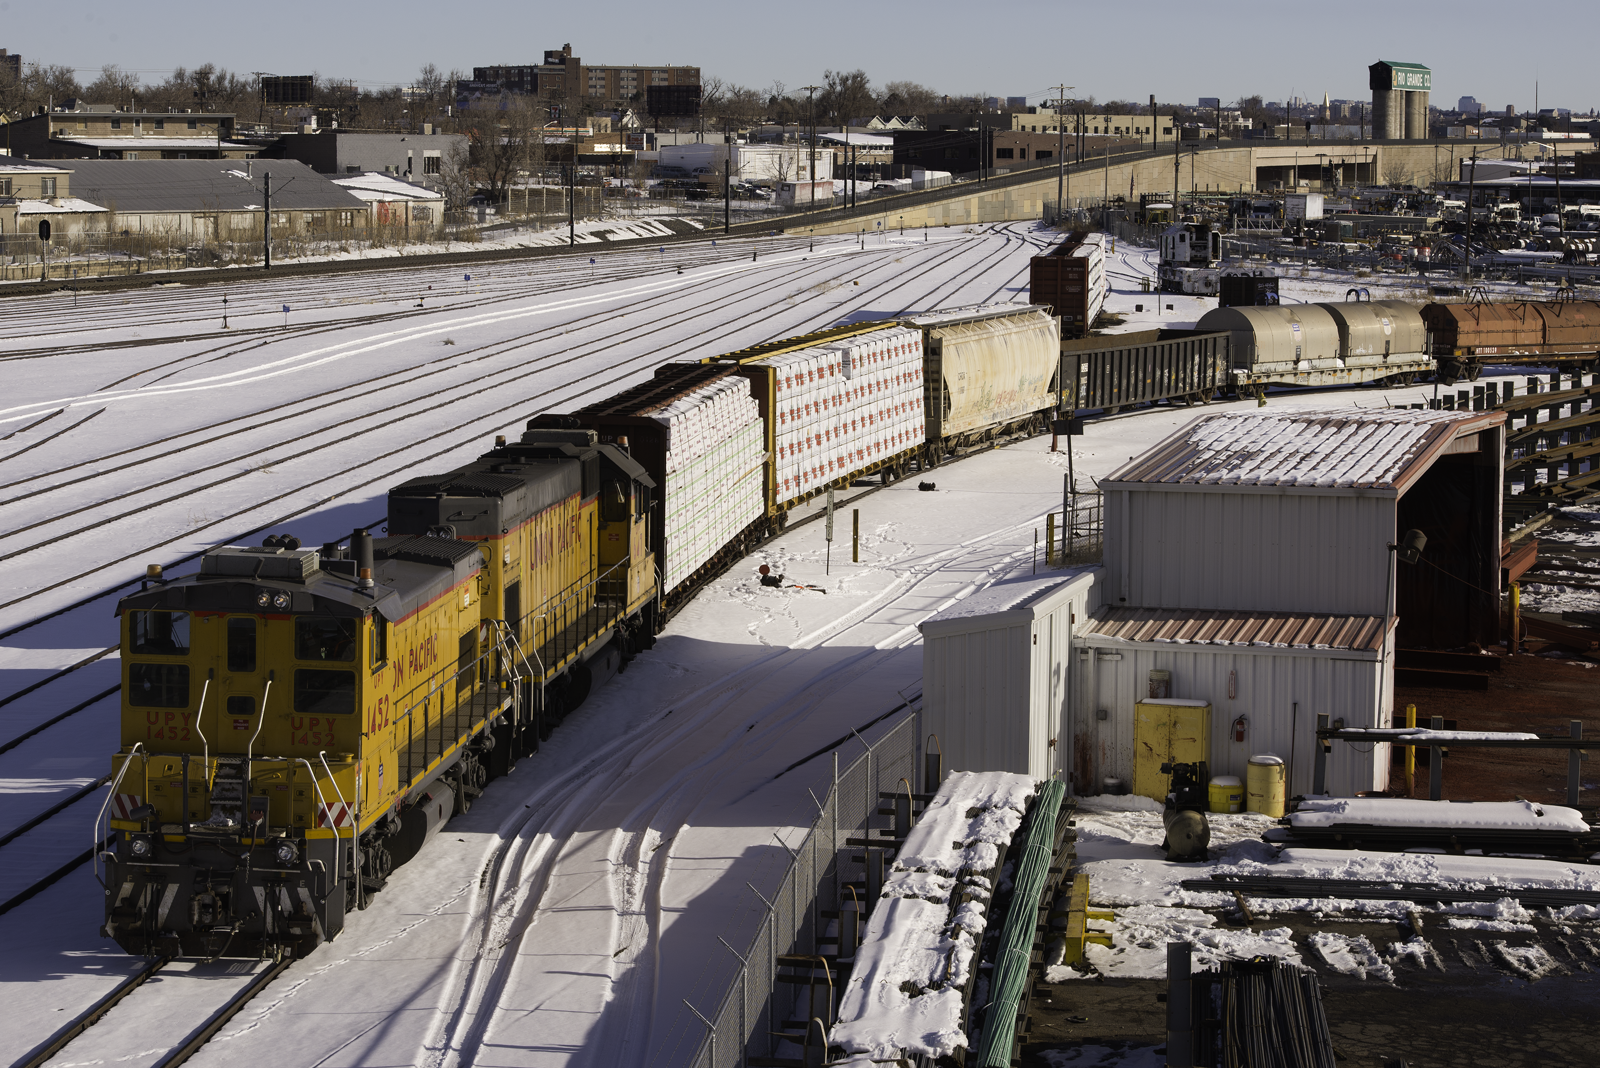 Yellow locomotives working in snow-covered yards